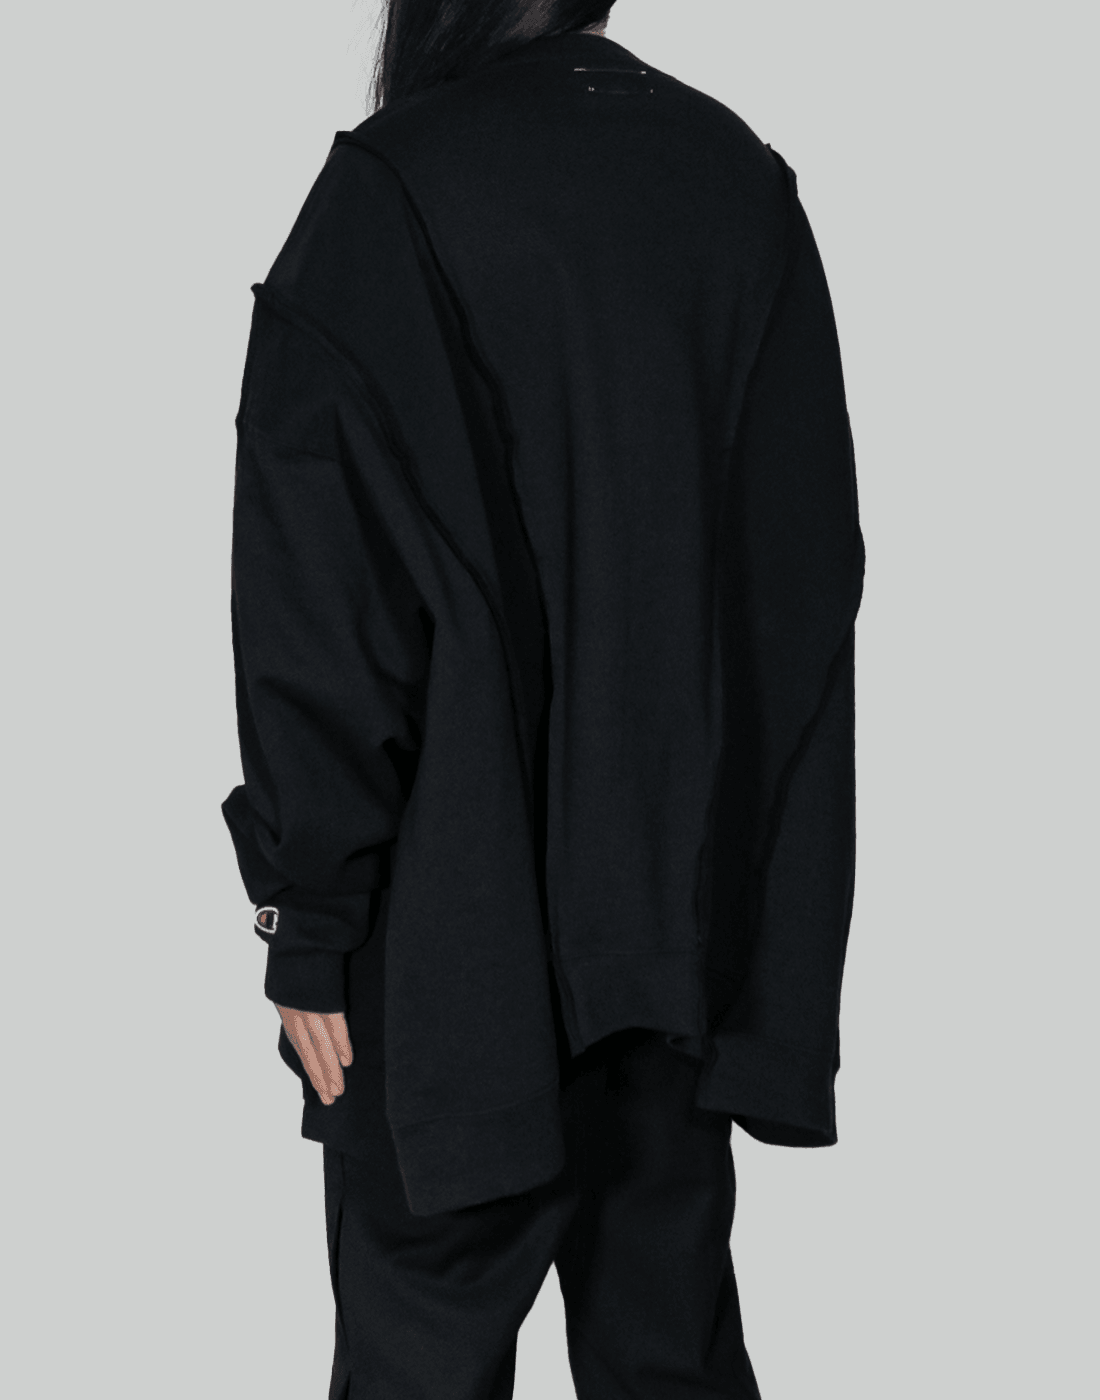 DISCOVERED Wide Champ Sweat - 082plus